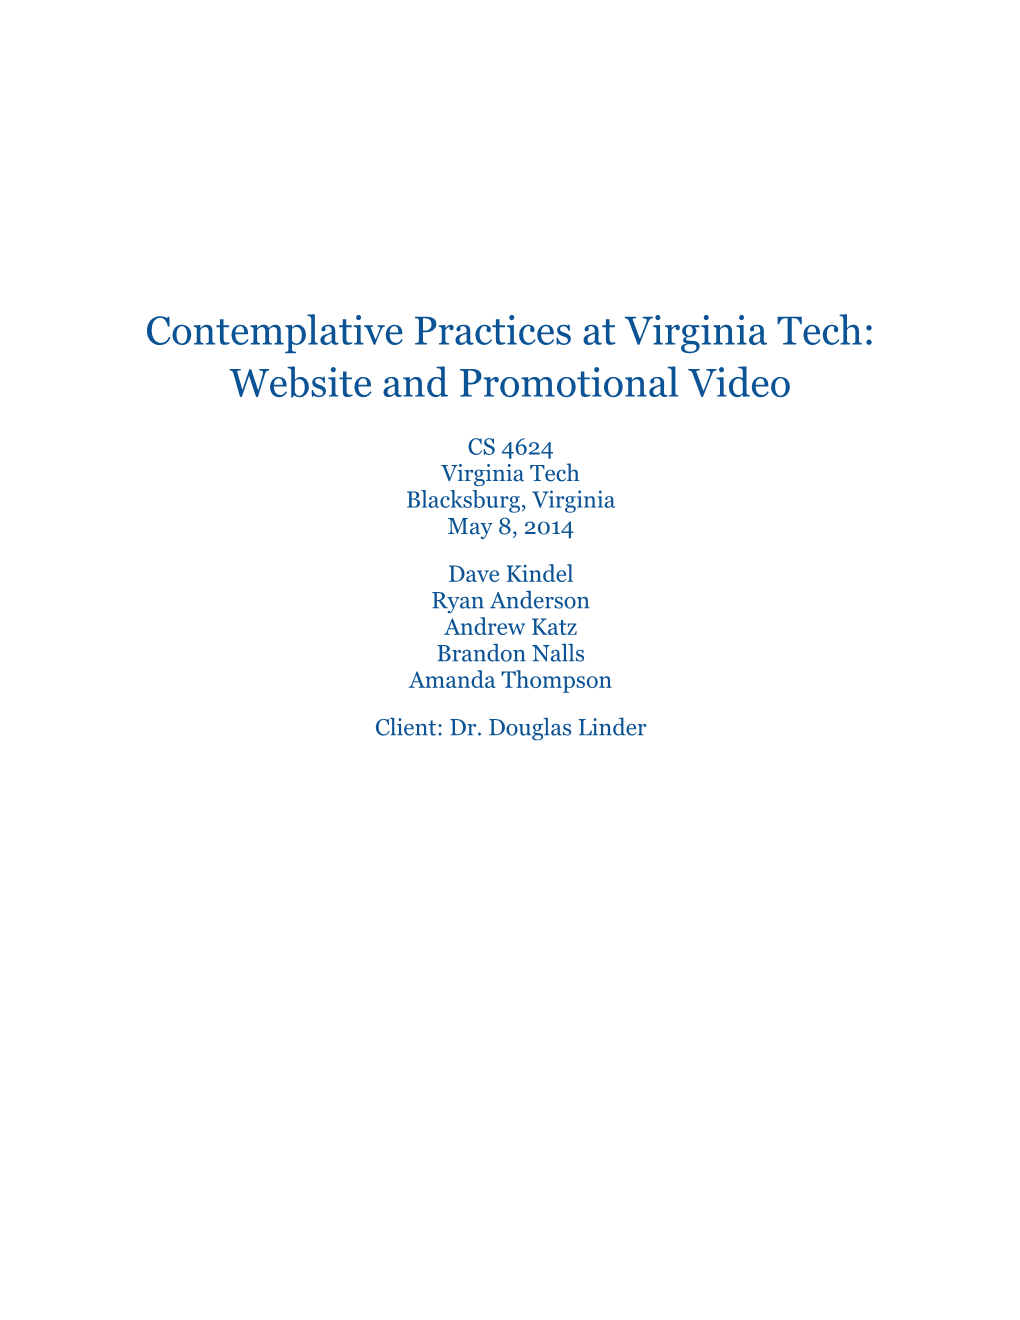 Contemplative Practices at Virginia Tech: Website and Promotional Video